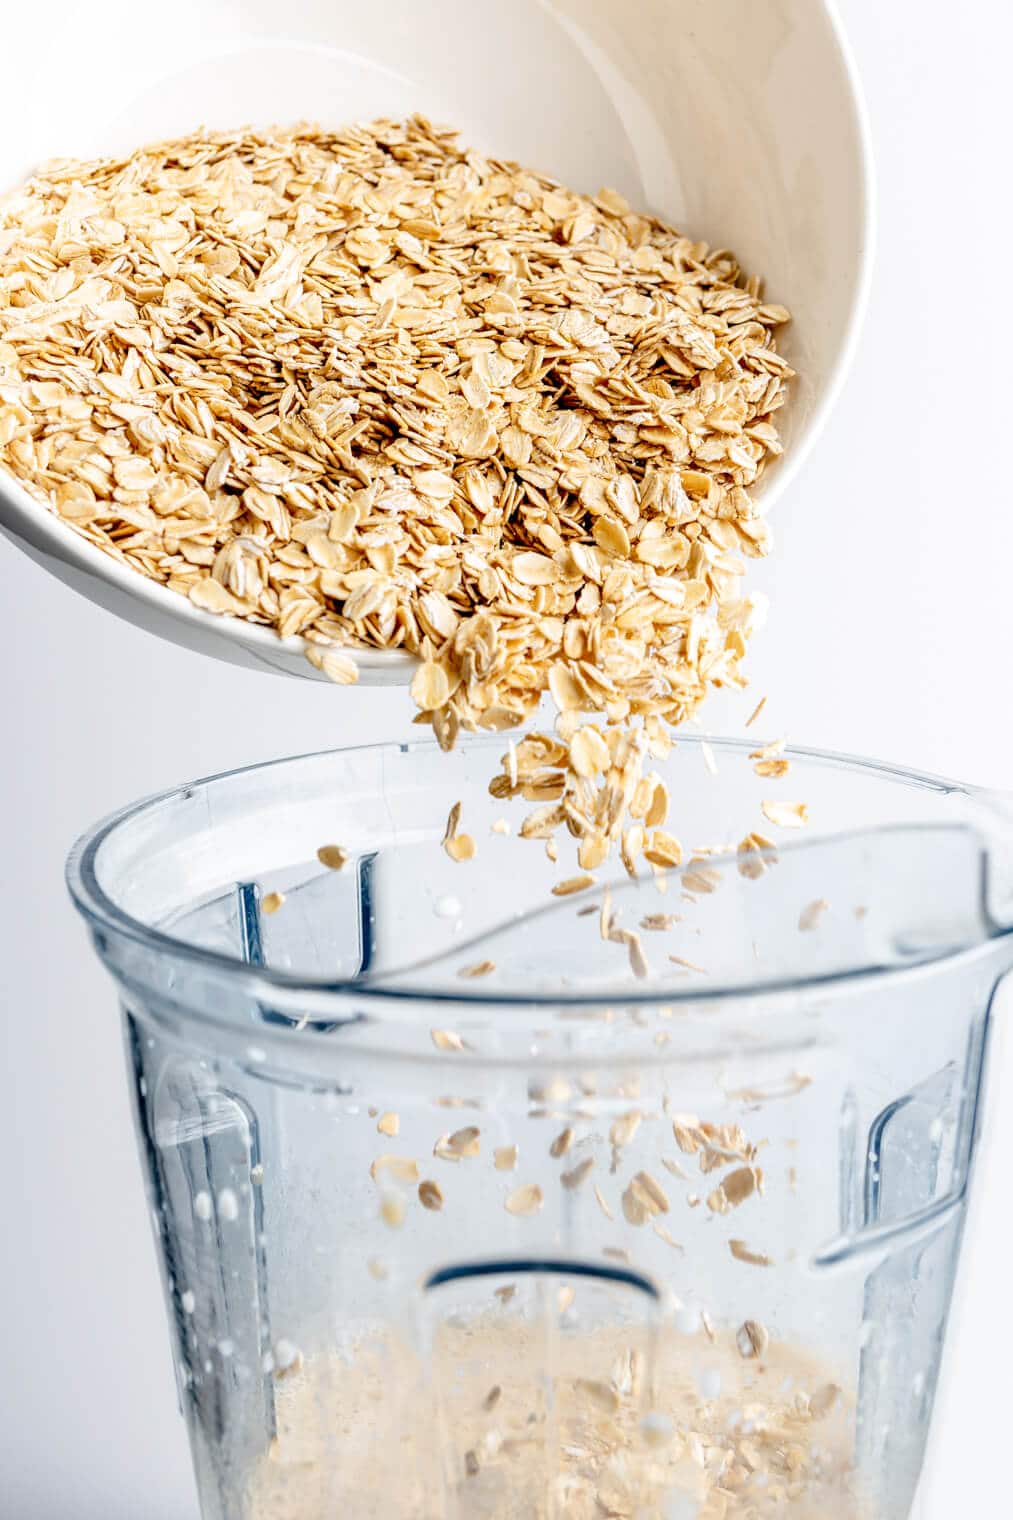 Oats being poured into a blender pitcher from a white bowl.